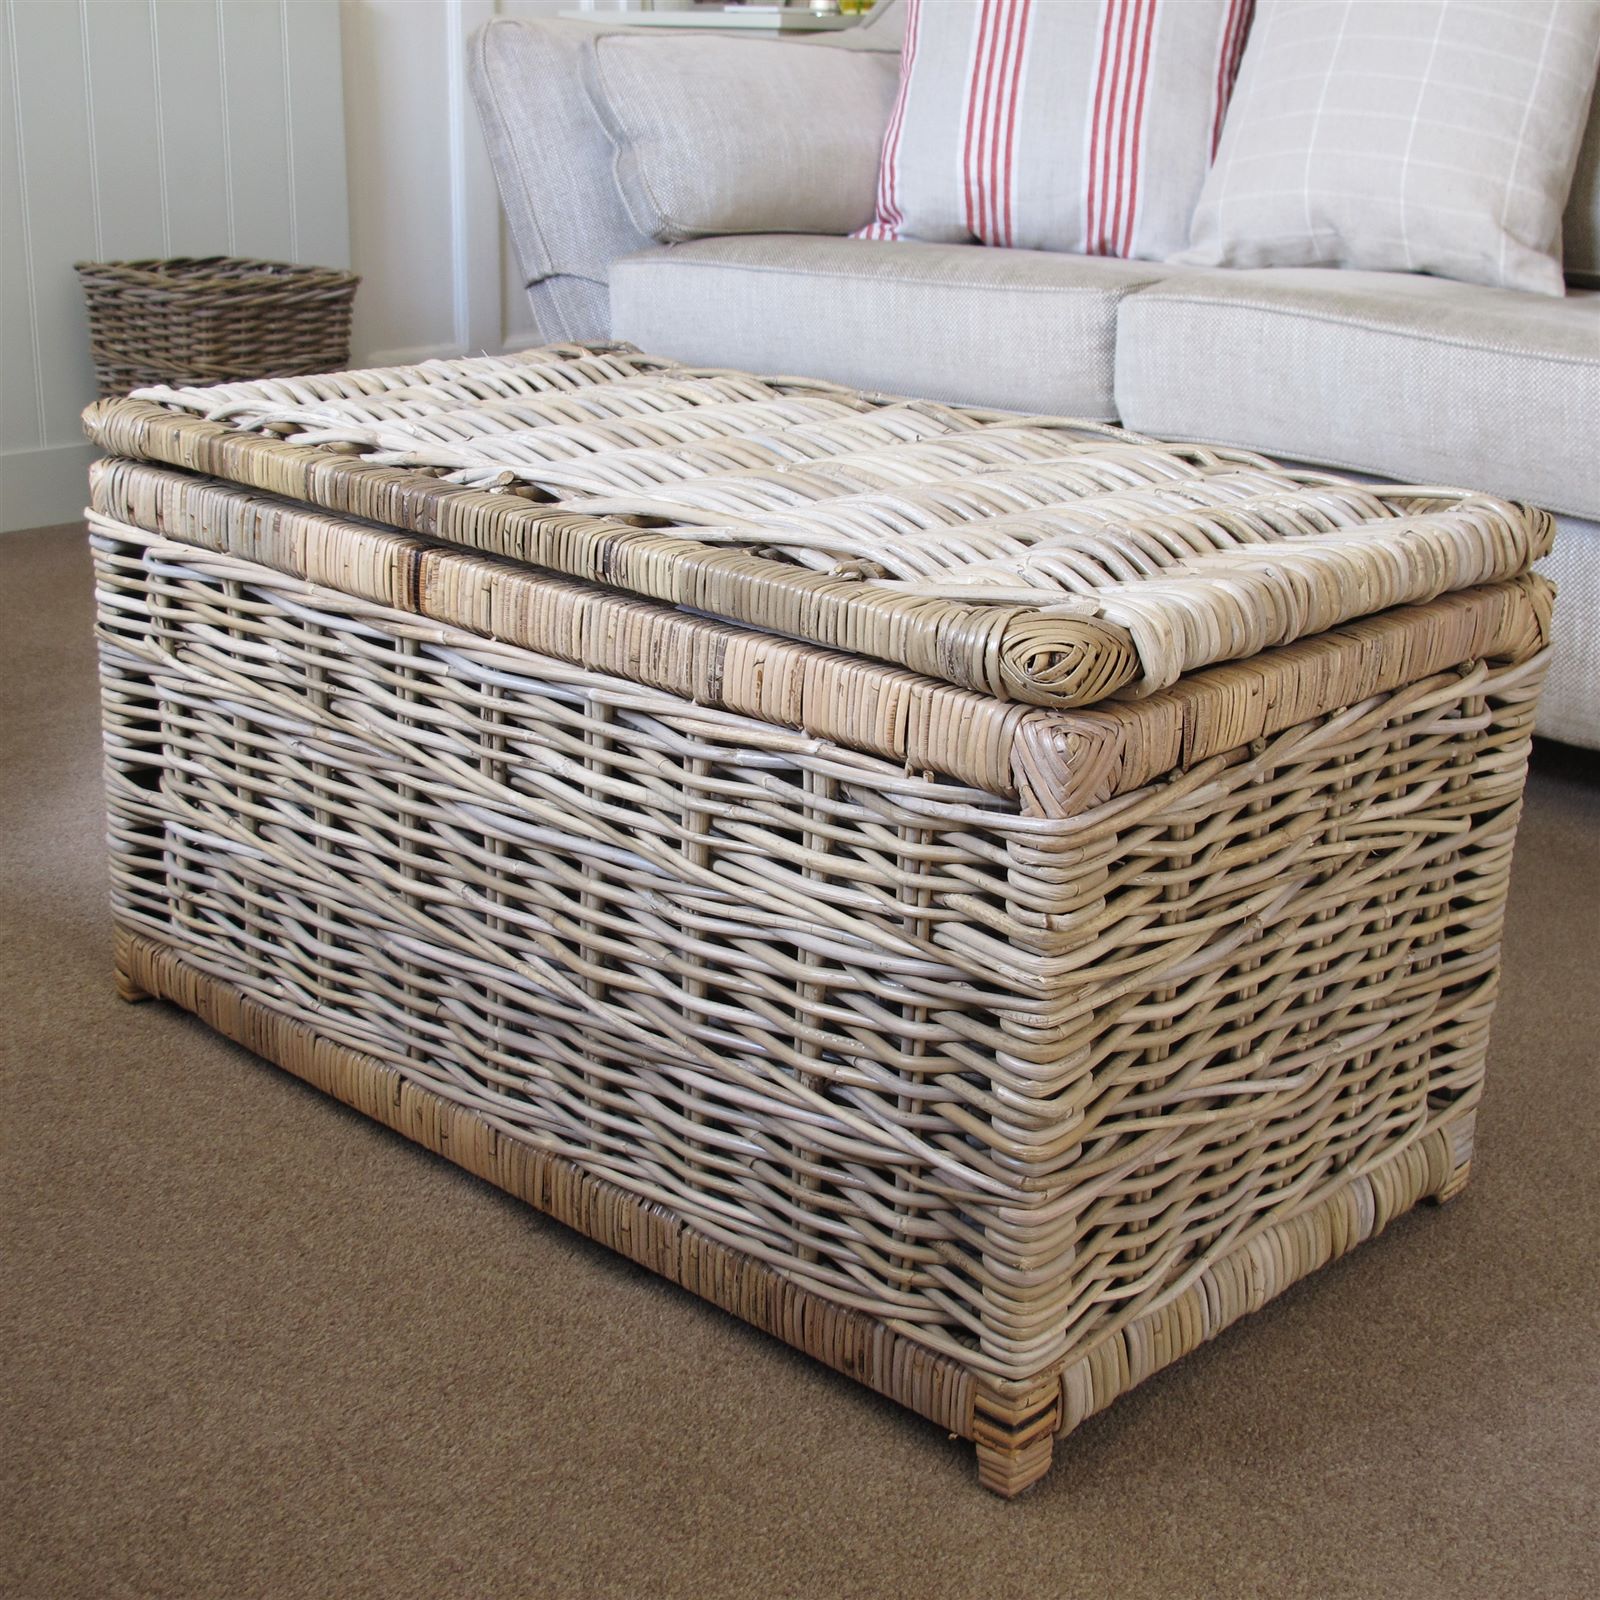 large wicker toy chest